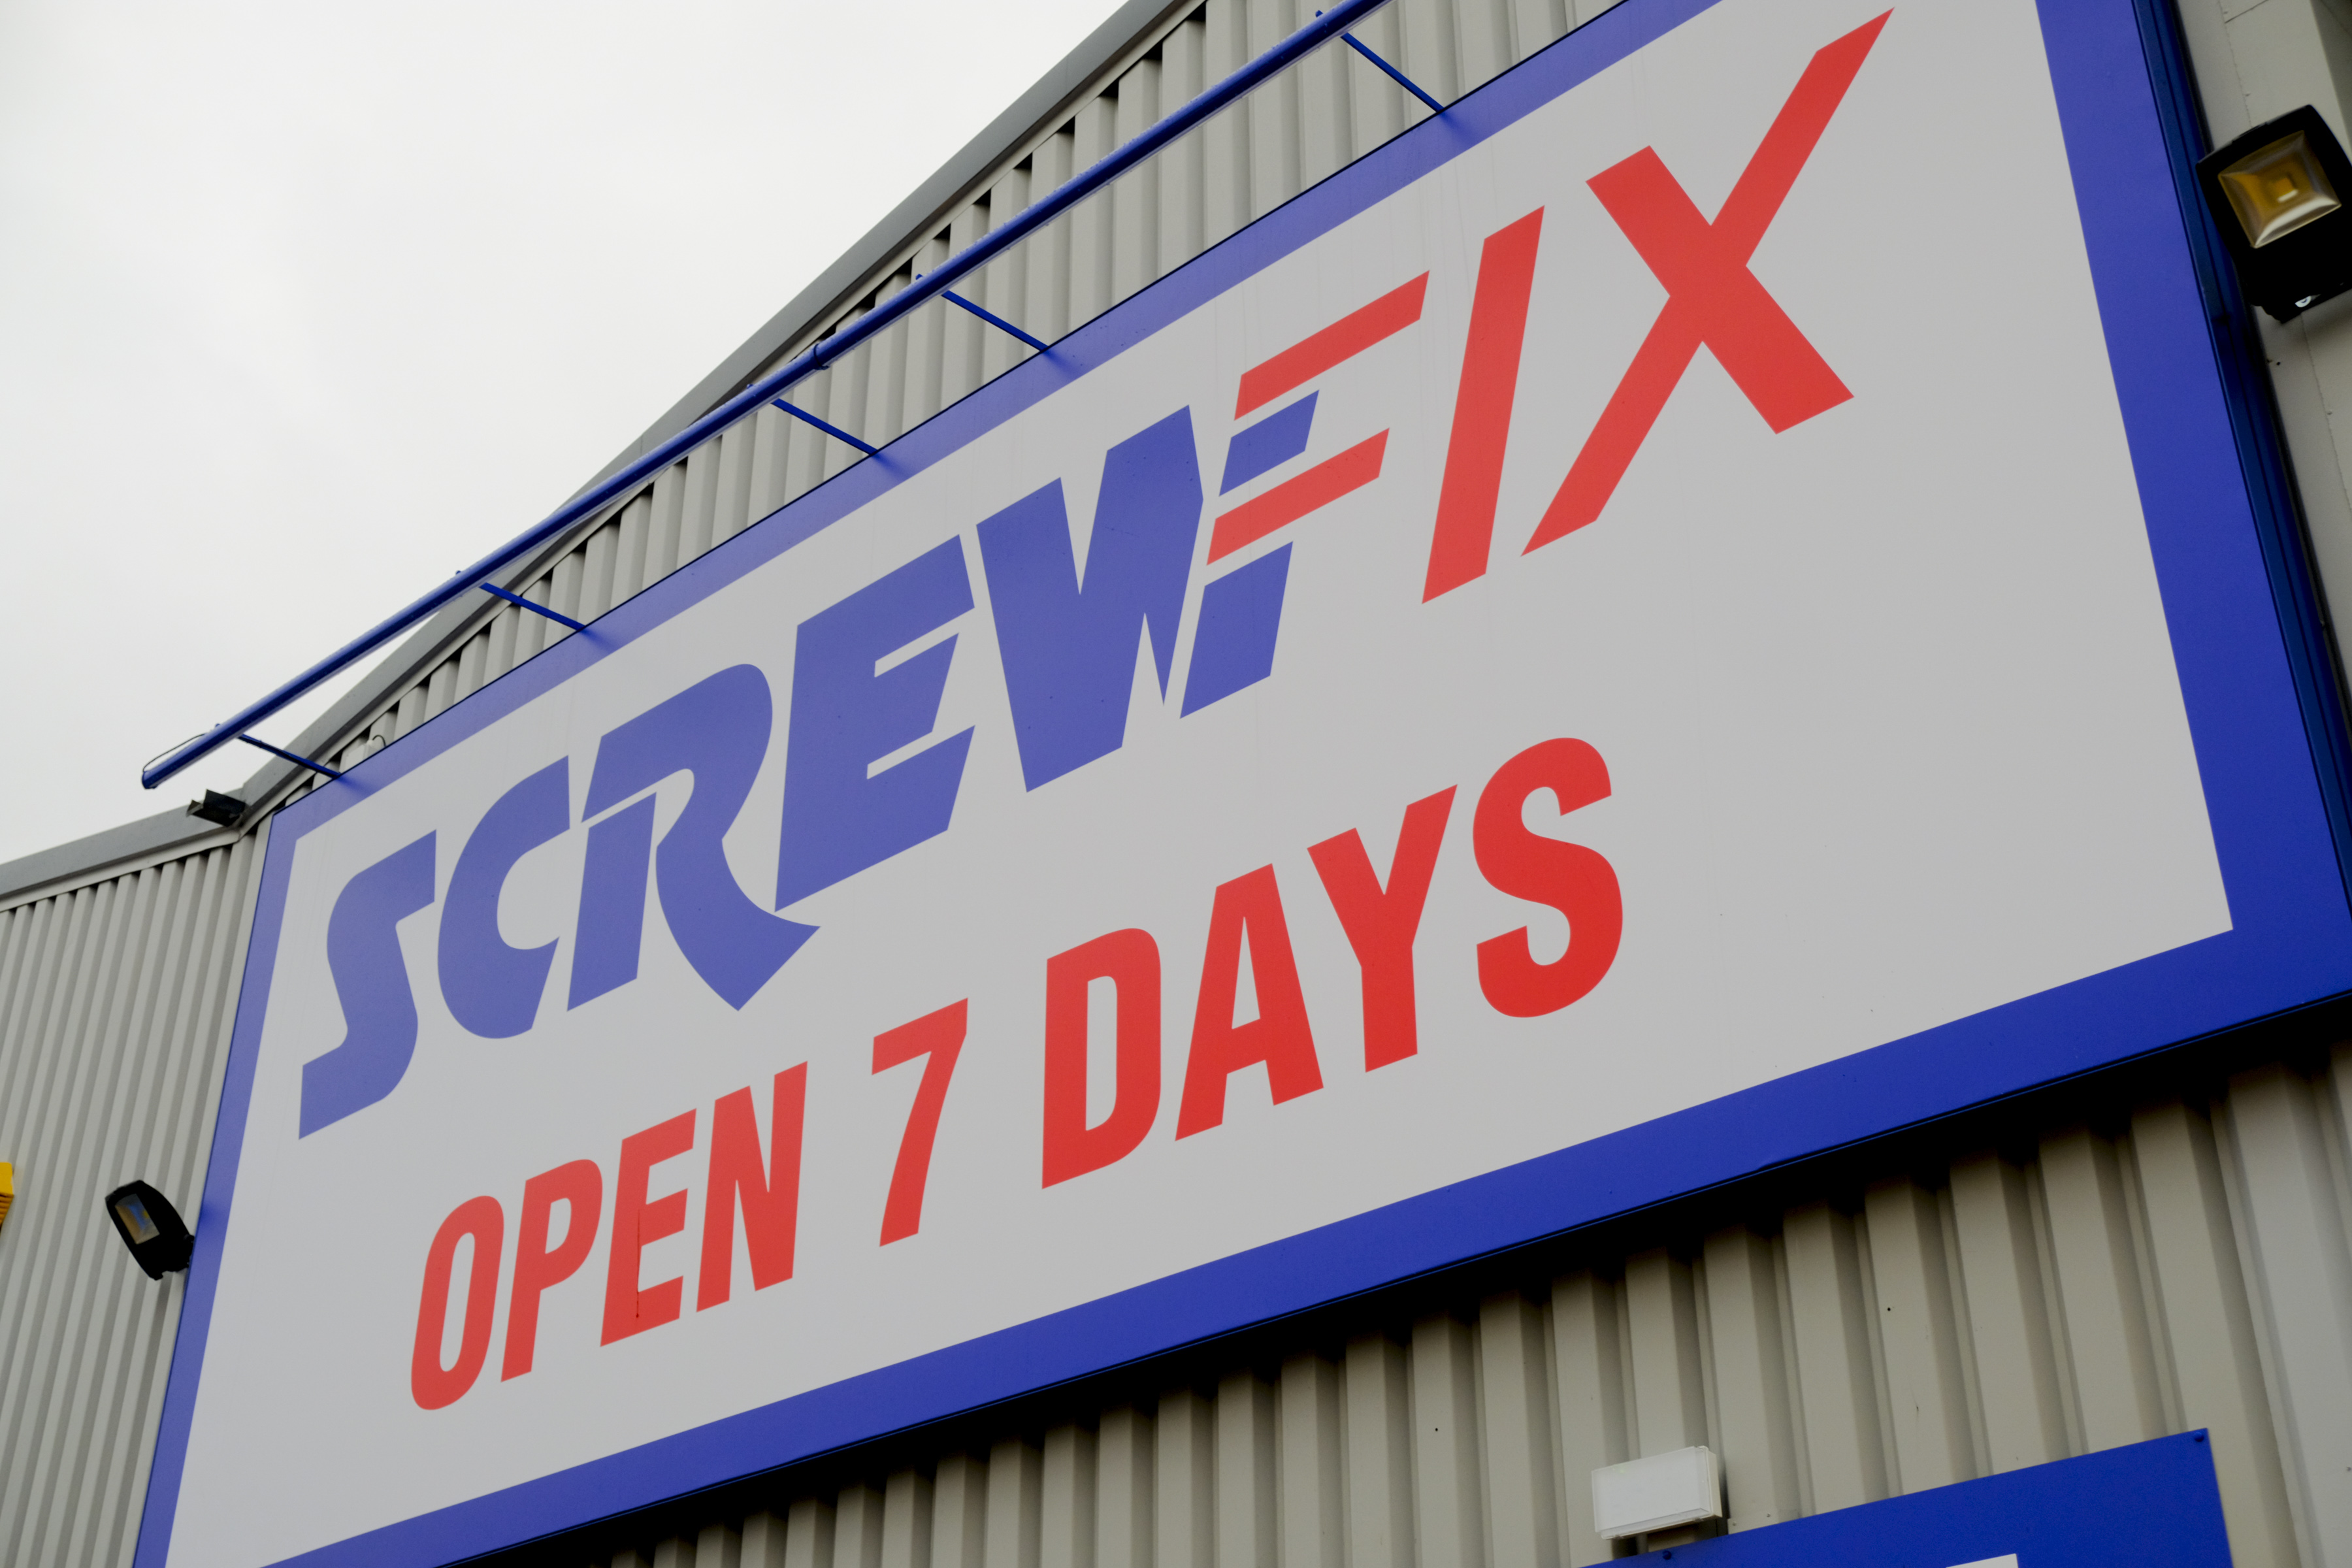 Screwfix first store to open in Portishead